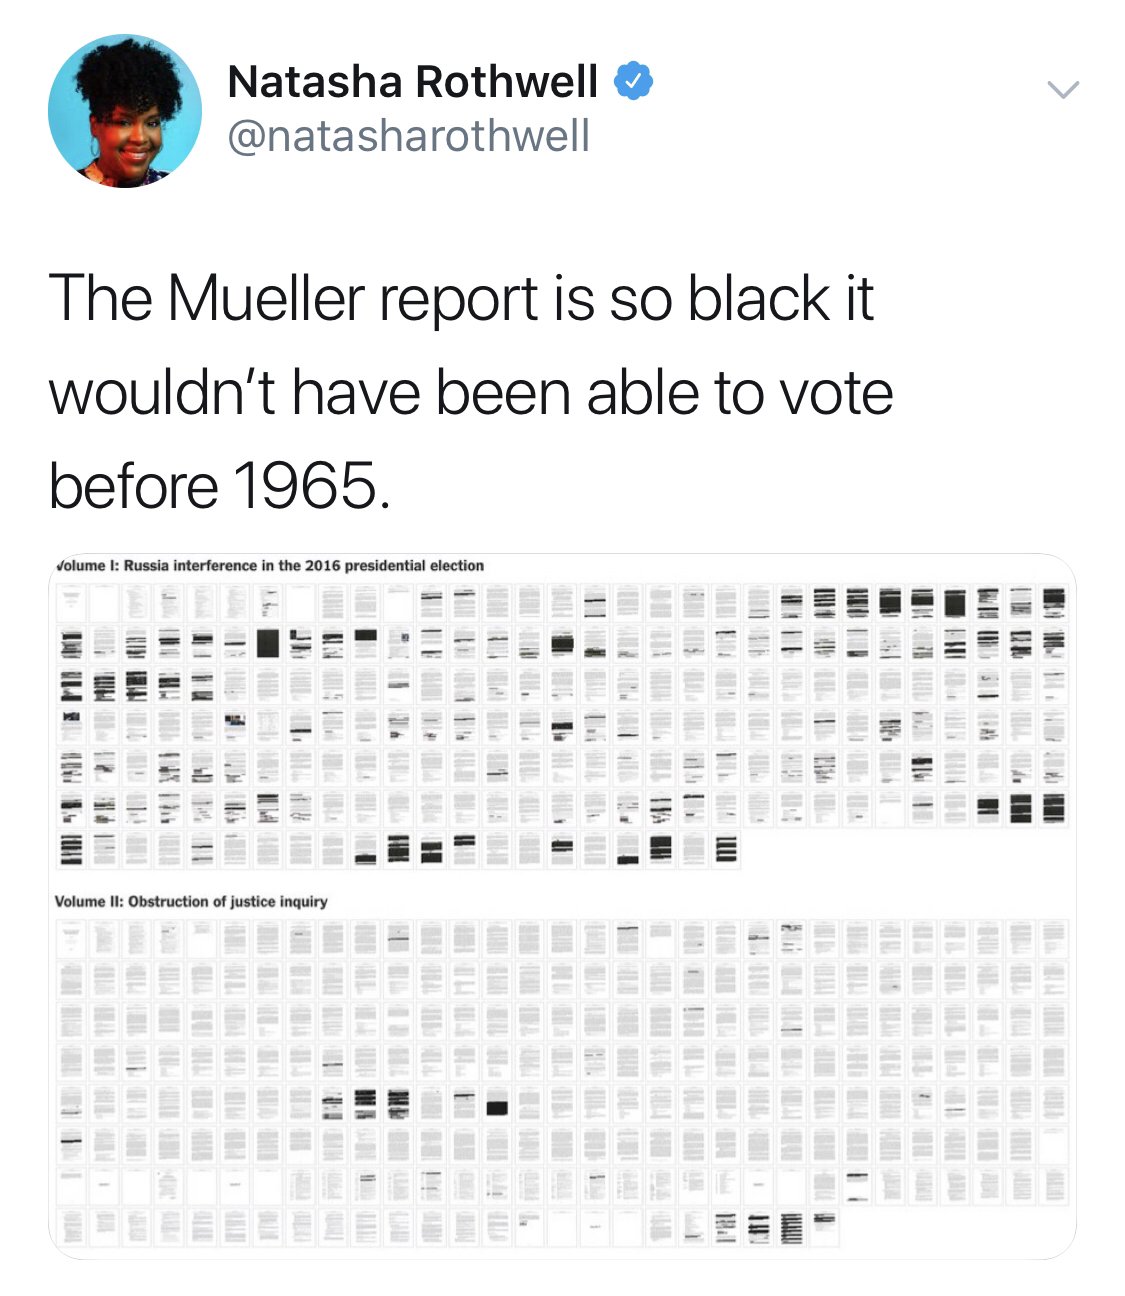 number - Natasha Rothwell The Mueller report is so black it wouldn't have been able to vote before 1965. Volume I Russia interference in the 2016 presidential election Int Volume Ii Obstruction of justice inquiry